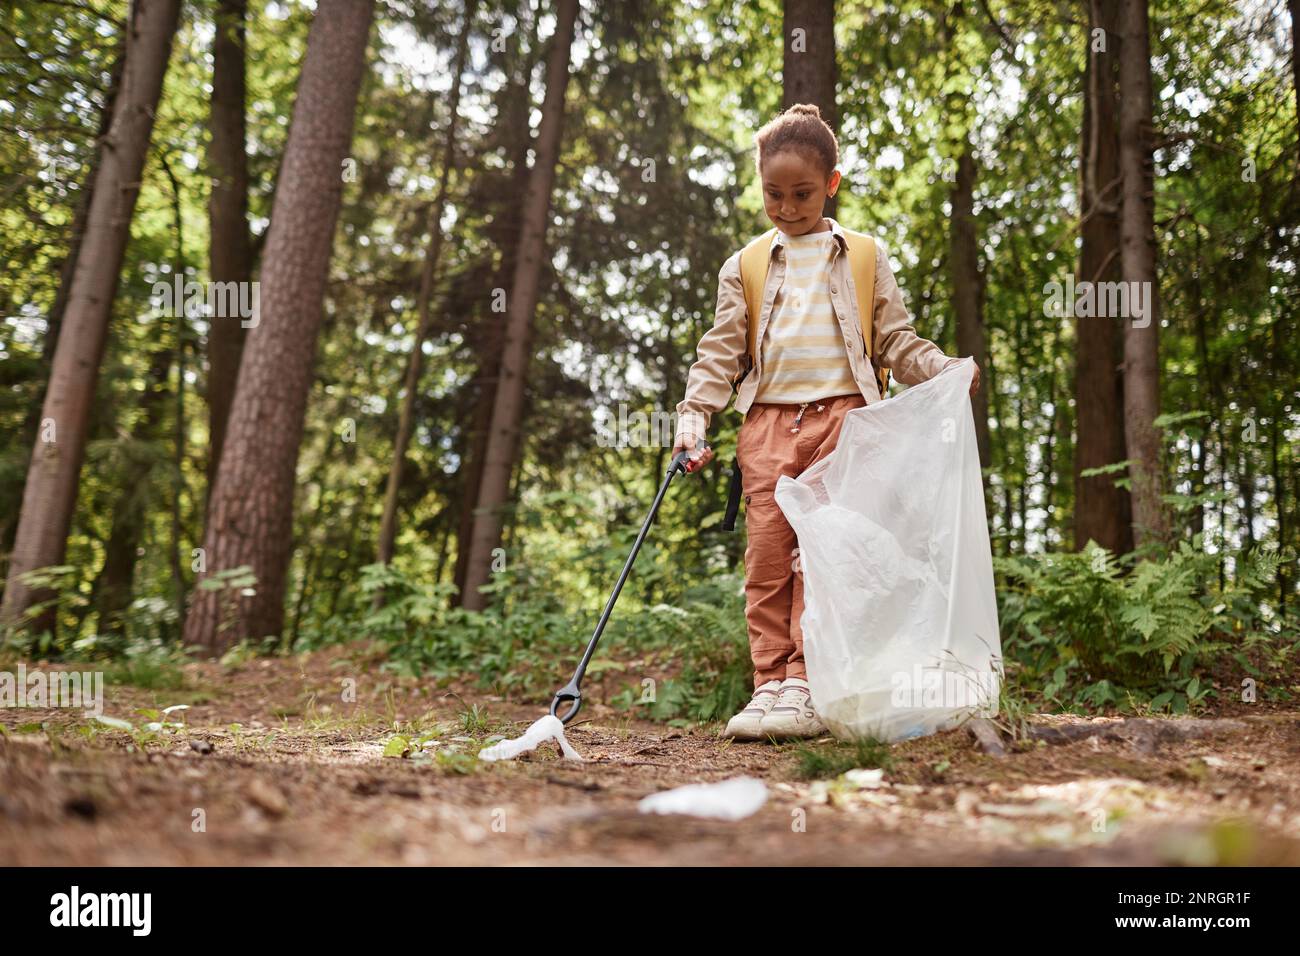 Full length portrait of smiling little girl picking up trash in nature trail, copy space Stock Photo